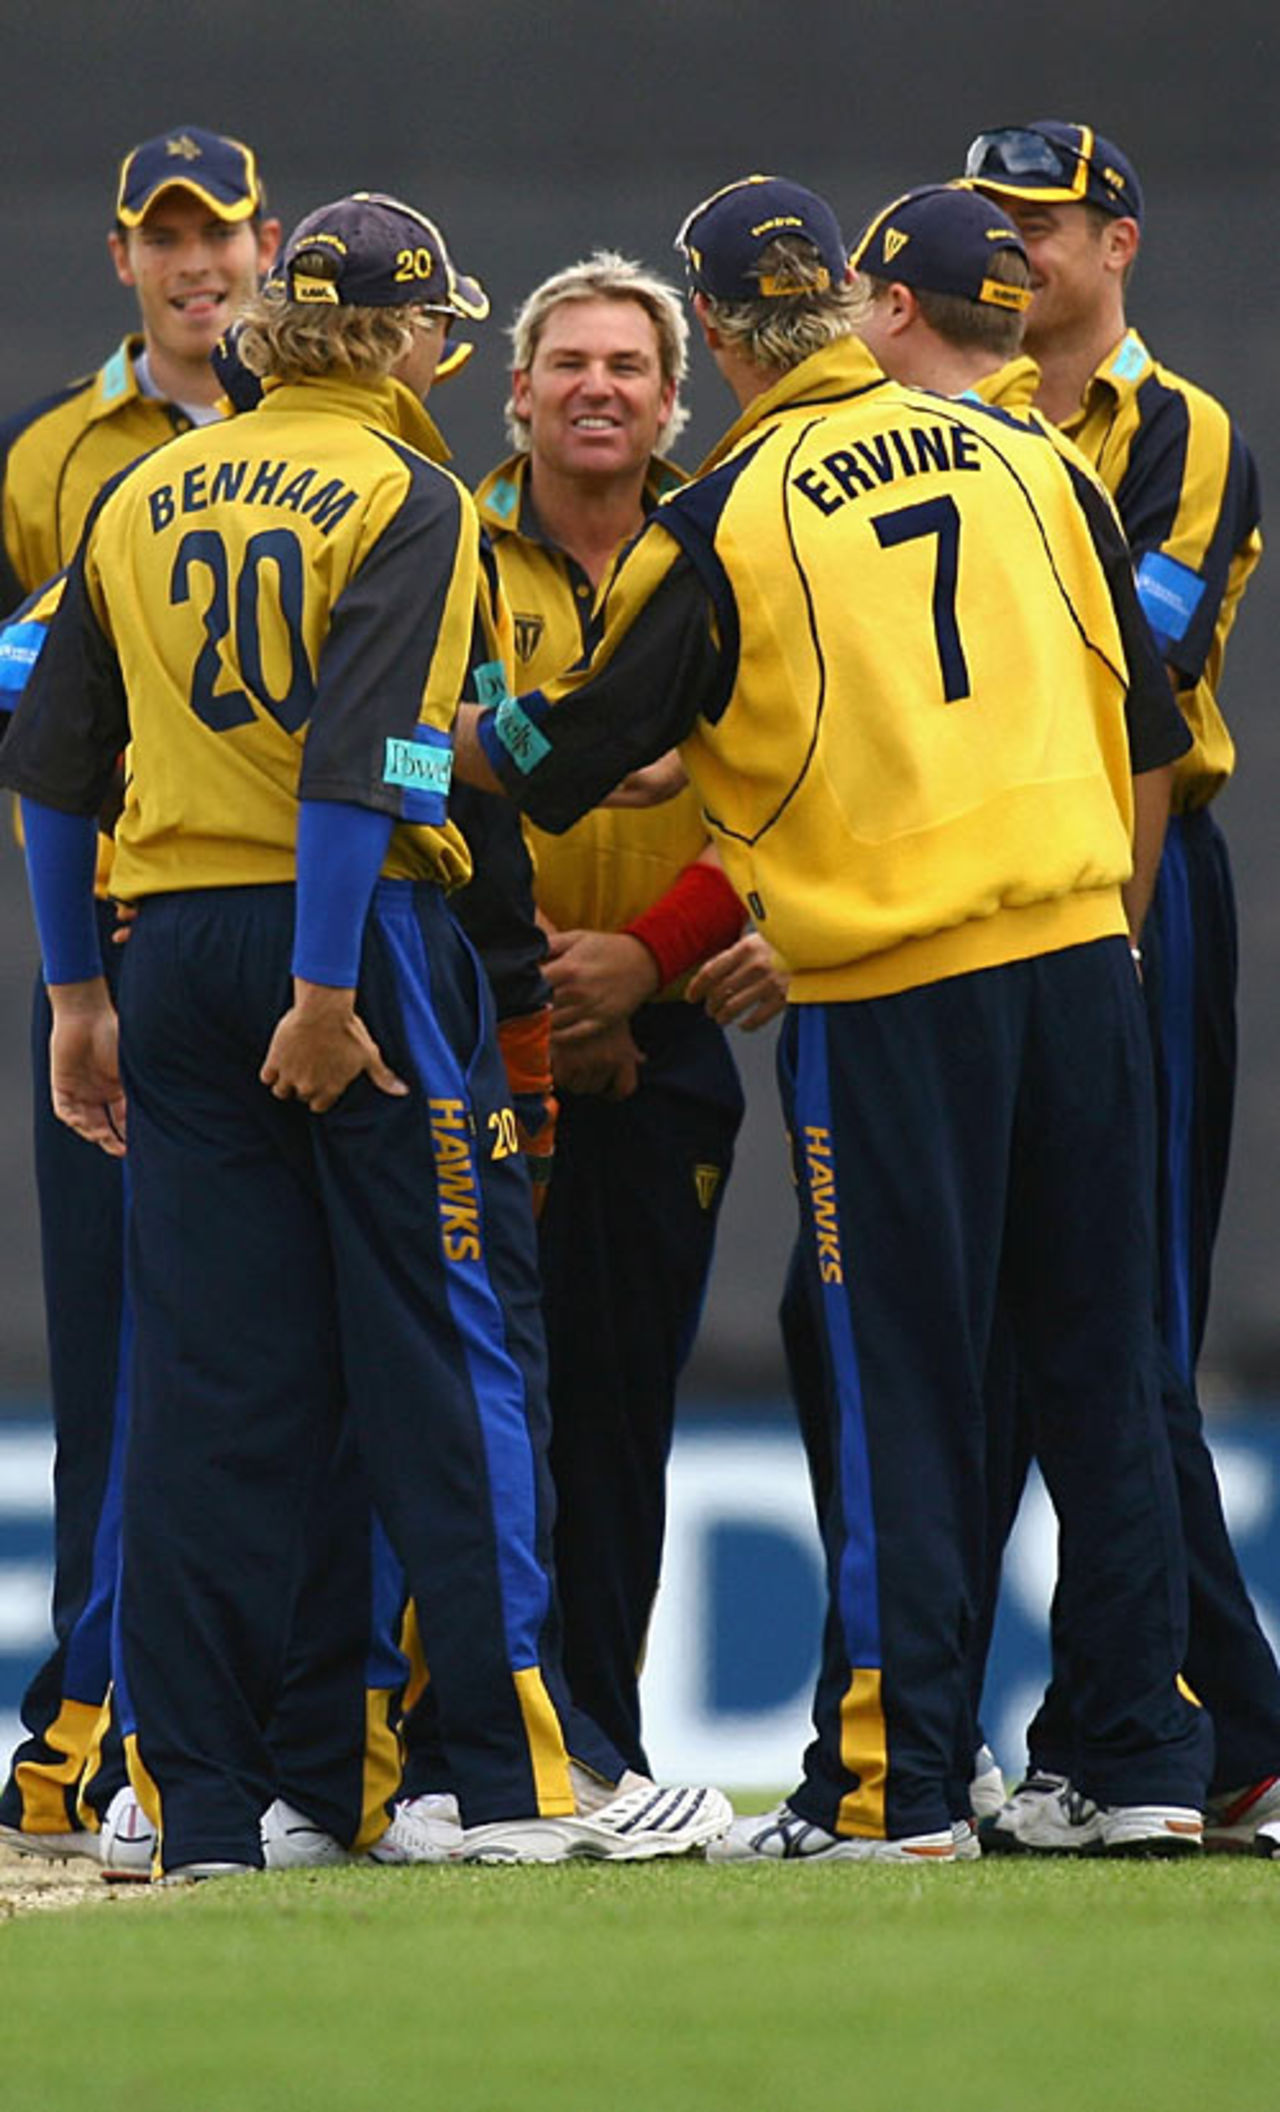 Shane Warne is congratulated by his Hampshire team-mates on another wicket, Hampshire v Sussex, Friends Provident Trophy, The Rose Bowl, May 20, 2007